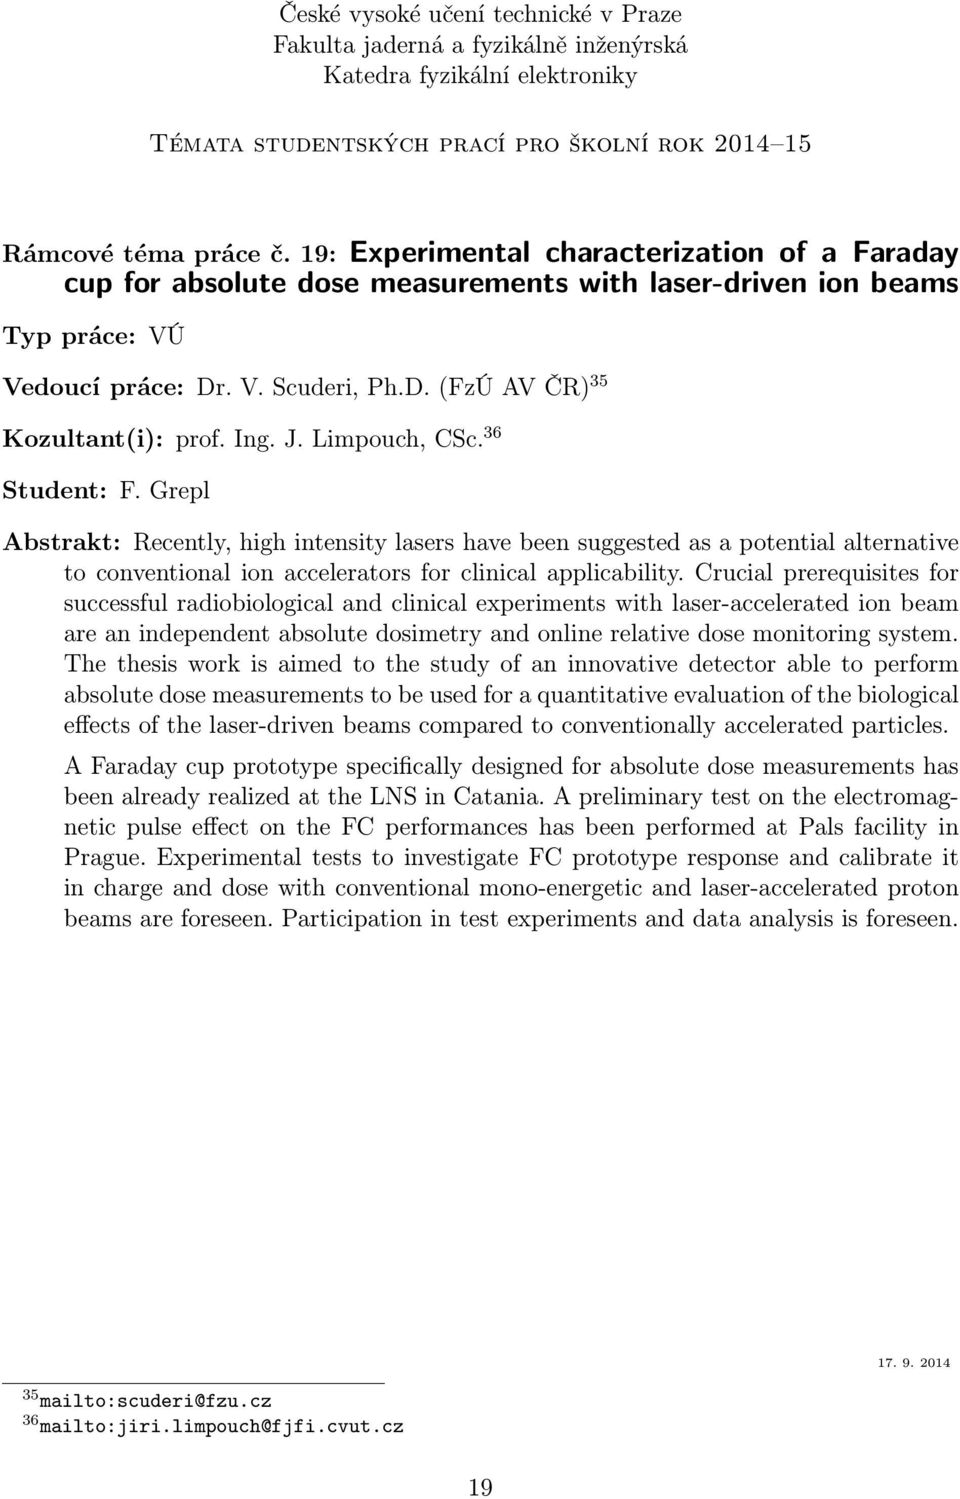 Crucial prerequisites for successful radiobiological and clinical experiments with laser-accelerated ion beam are an independent absolute dosimetry and online relative dose monitoring system.